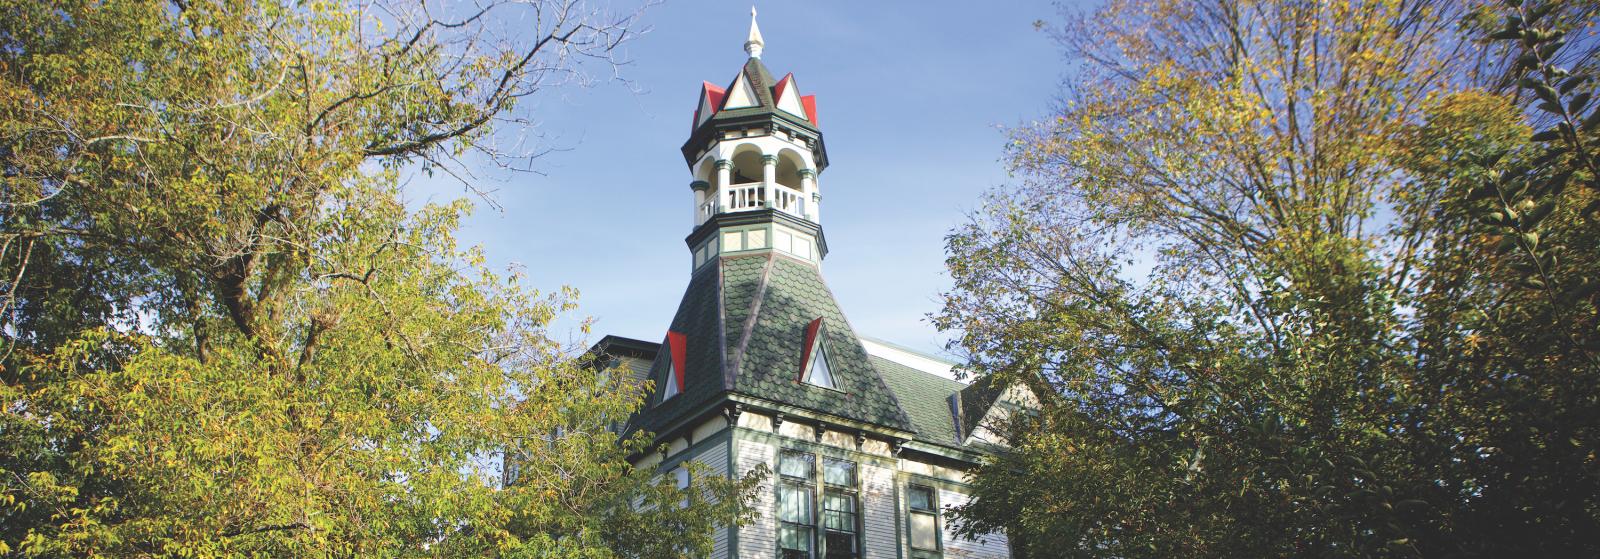 The tower of Debevoise Hall at Vermont Law School